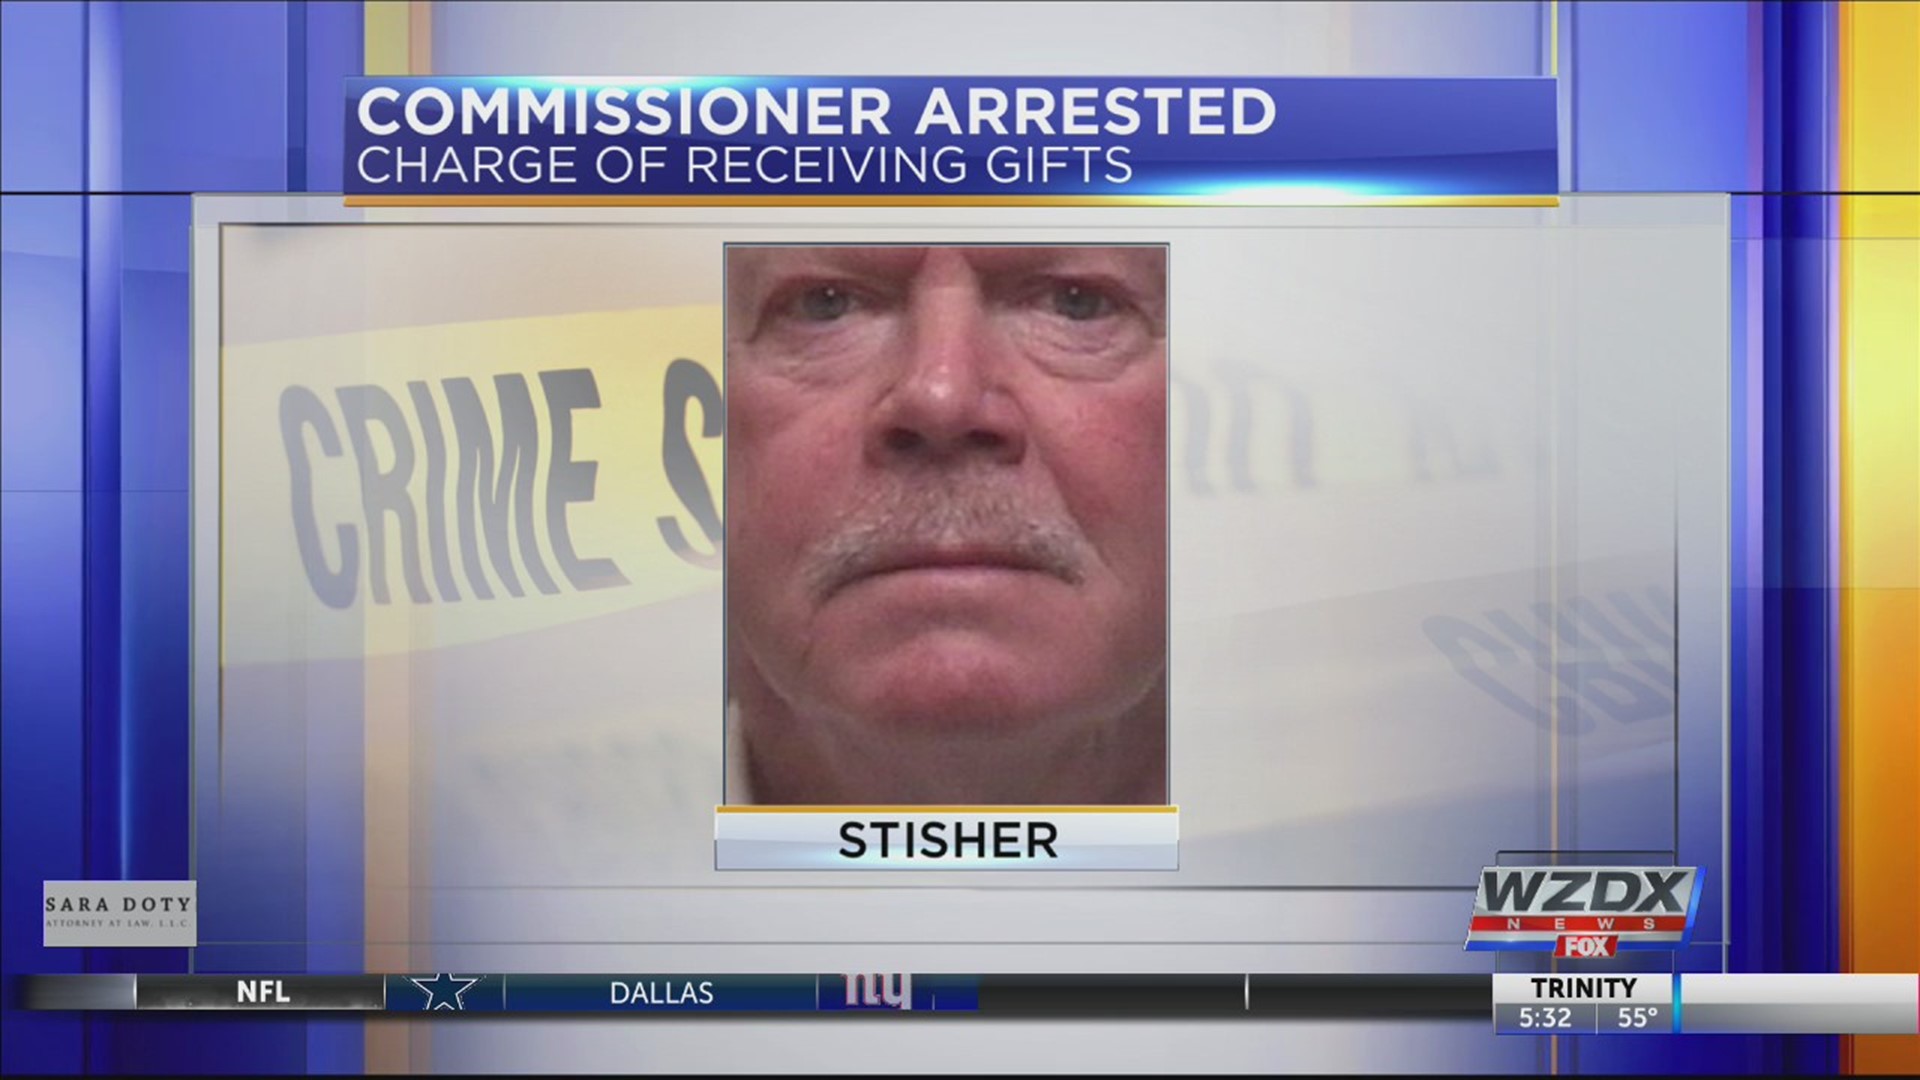 Morgan County's District 3 Commissioner has been arrested for violating Alabama's ethics laws.